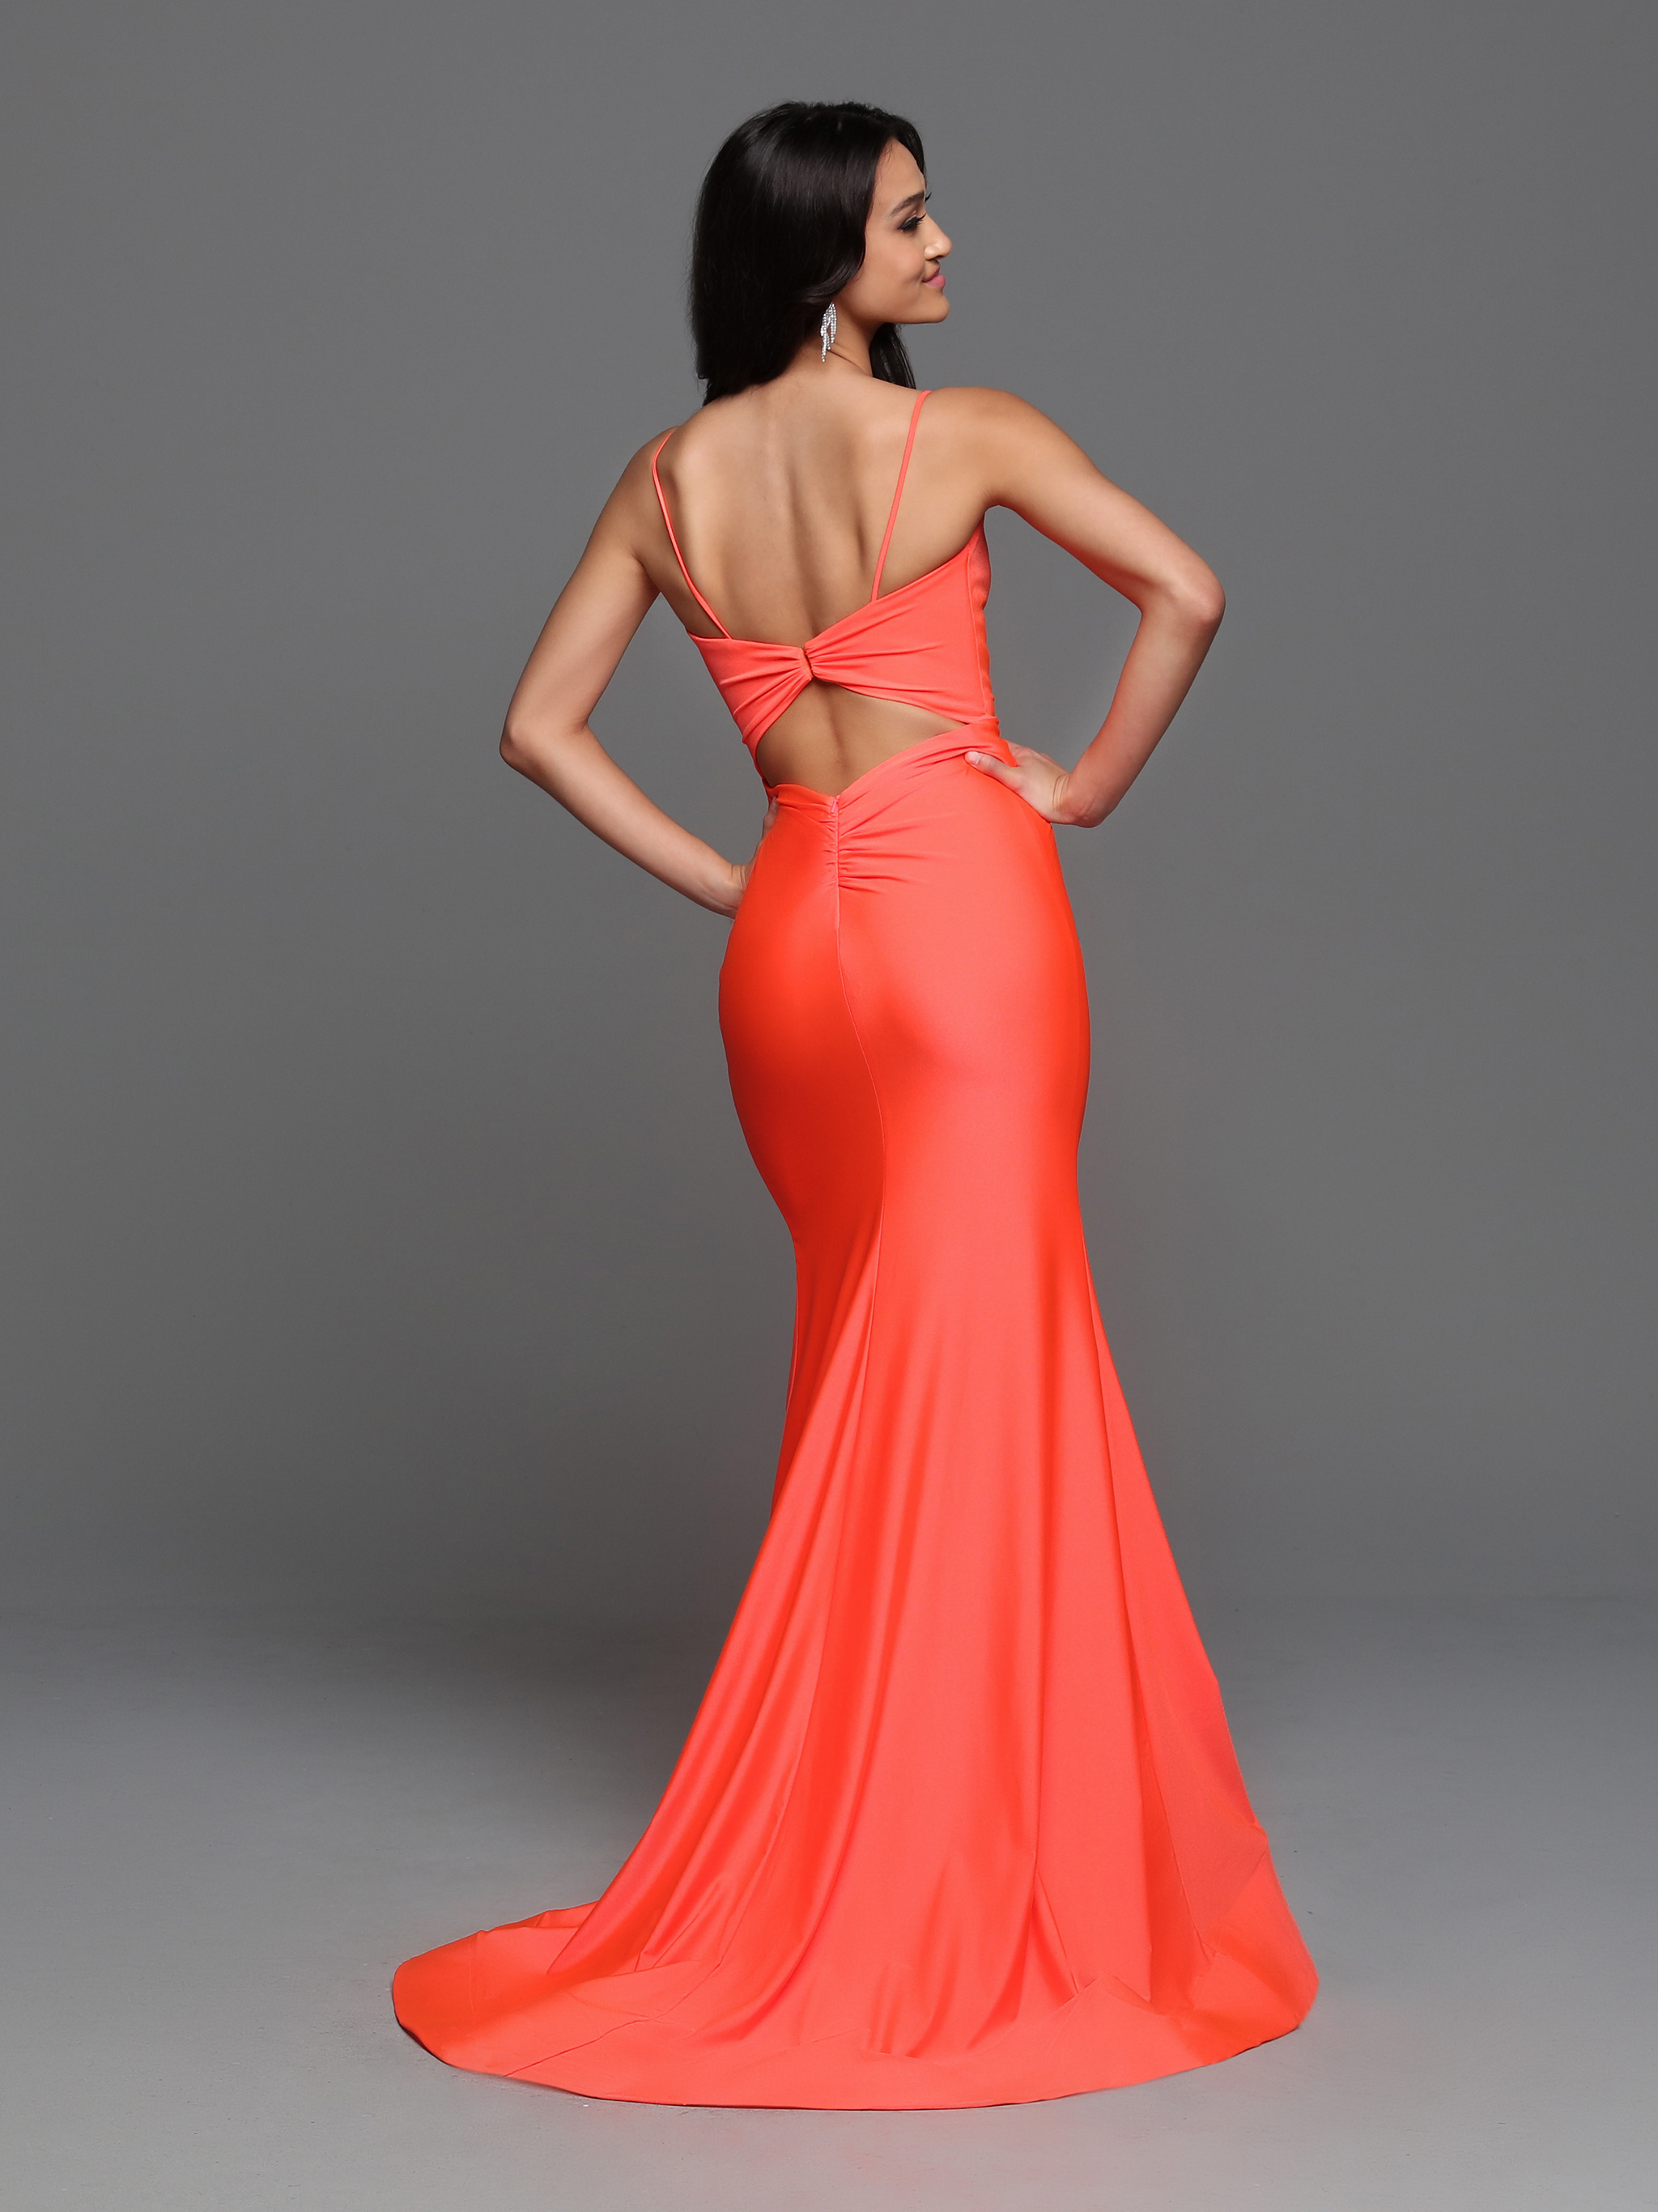 Image showing back view of style #72230